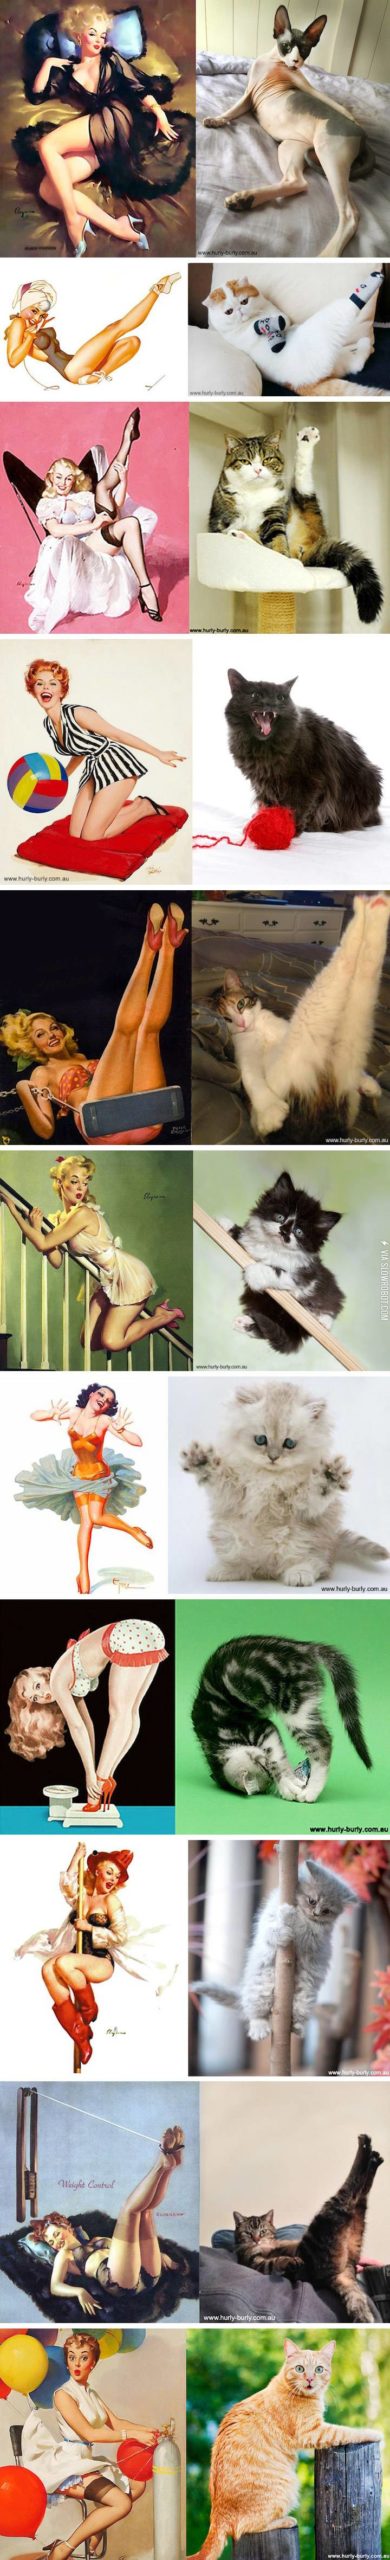 Cats+that+pose+like+pin-up+girls.